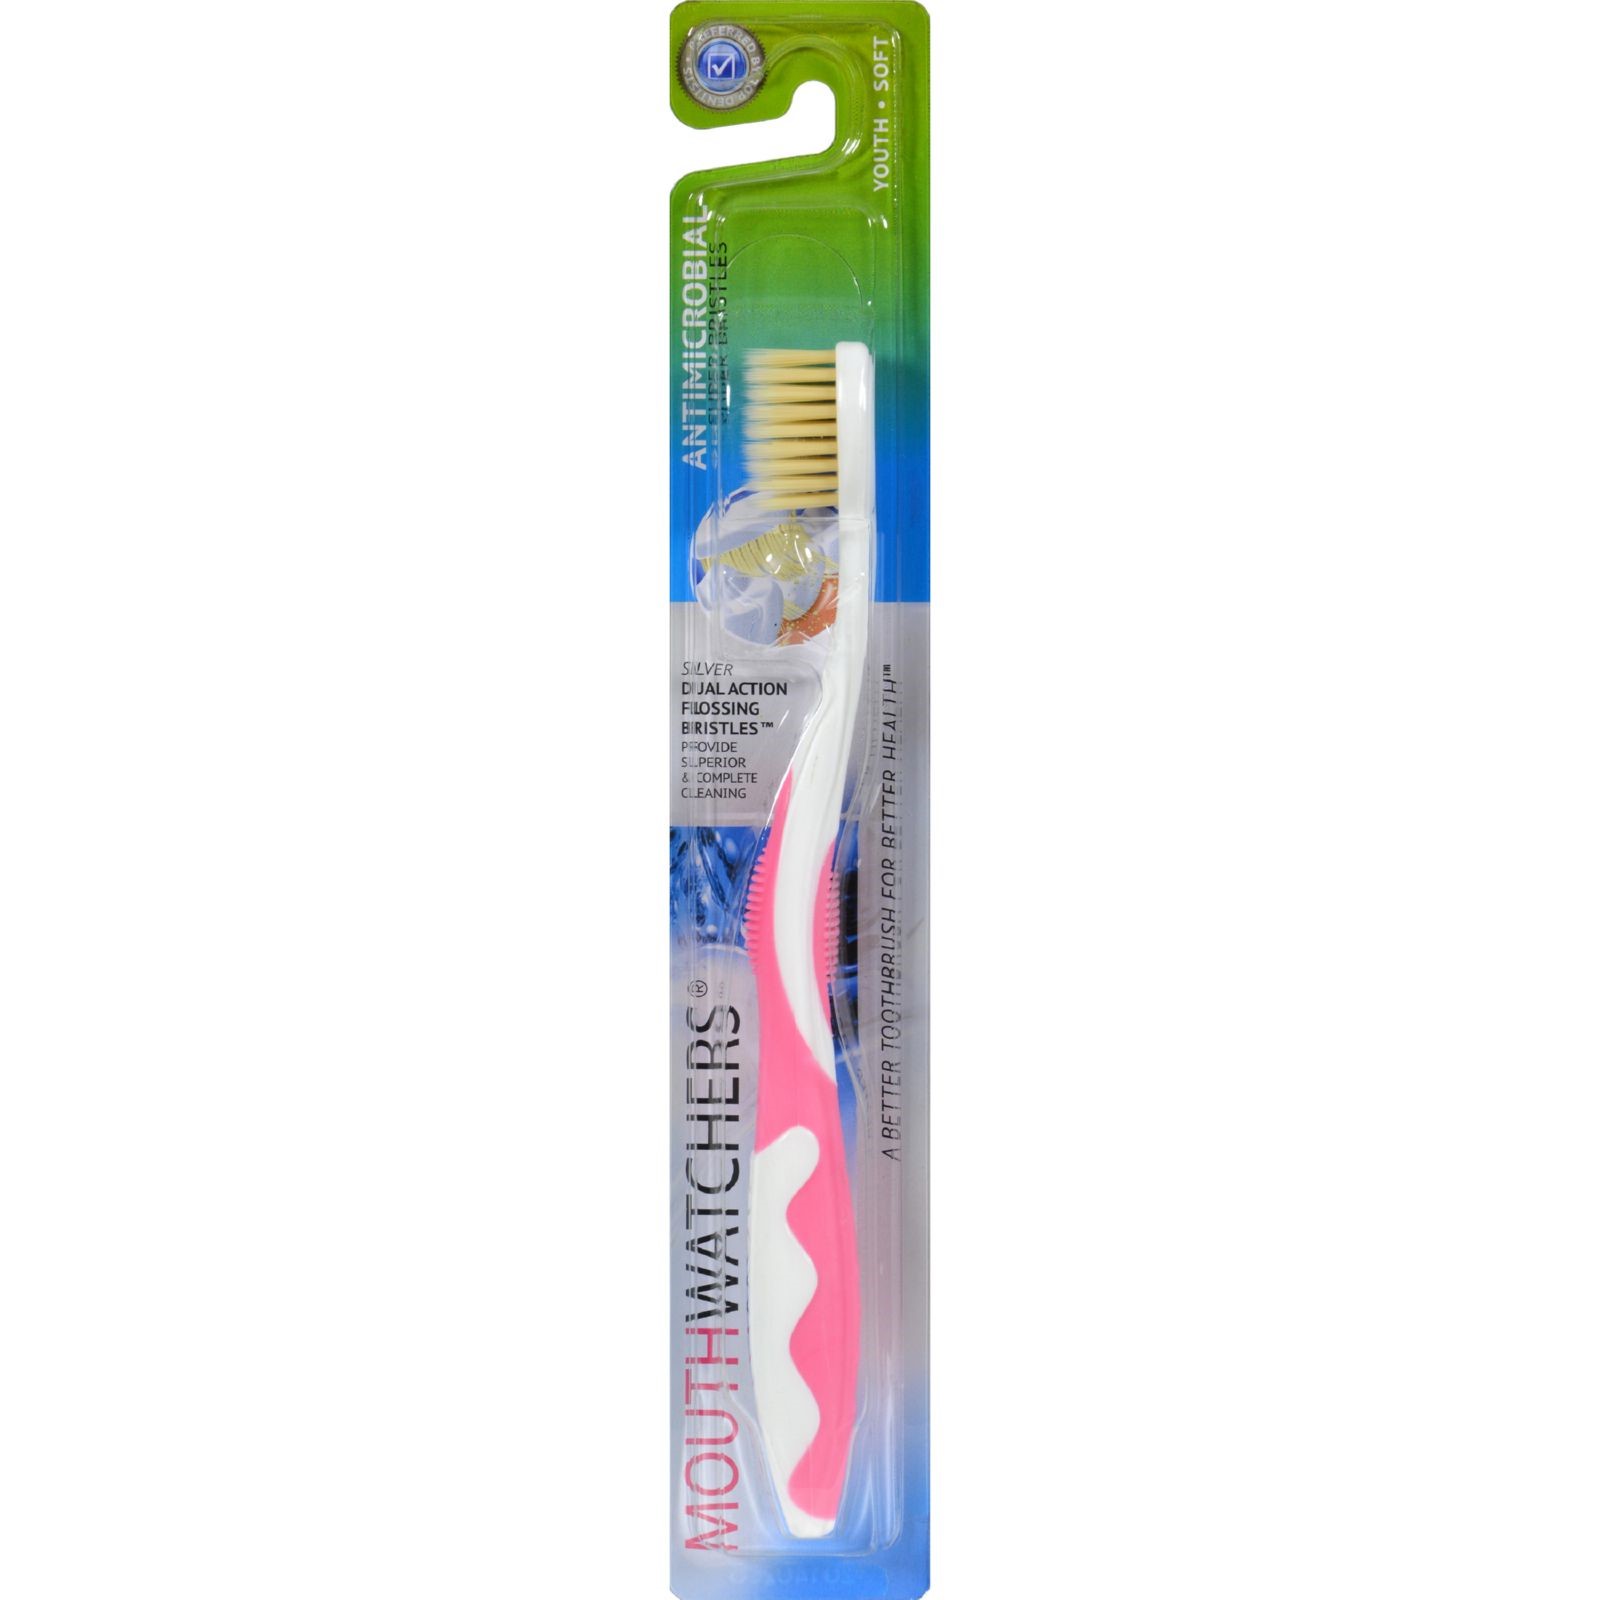 Mouth Watchers Antibacterial Youth Toothbrush, Pink - image 1 of 2